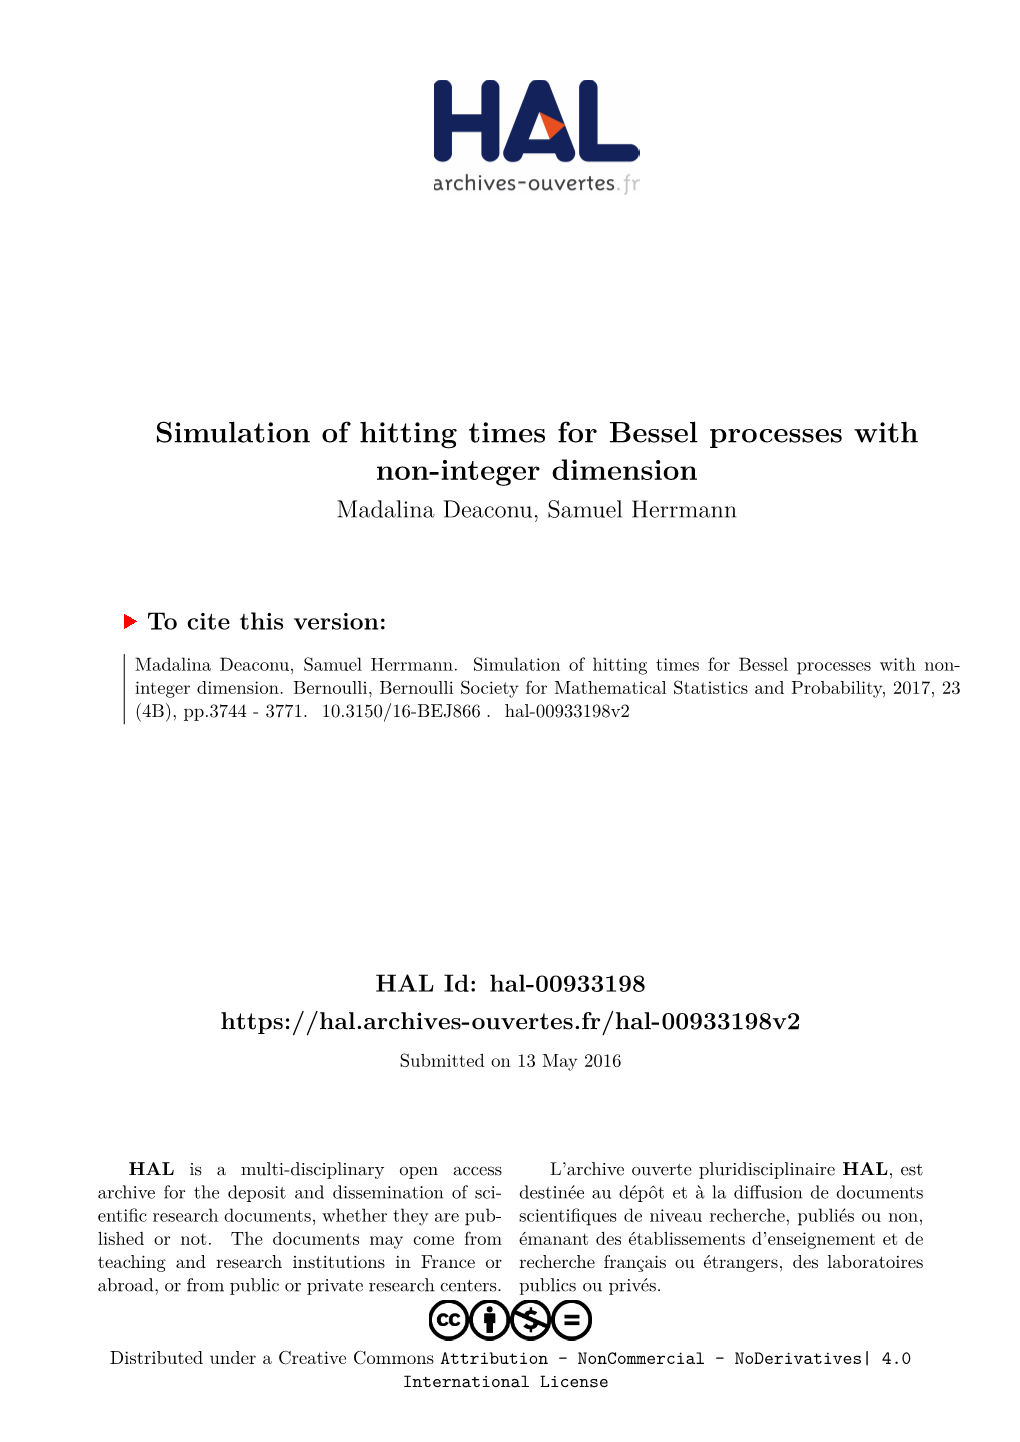 Simulation of Hitting Times for Bessel Processes with Non-Integer Dimension Madalina Deaconu, Samuel Herrmann